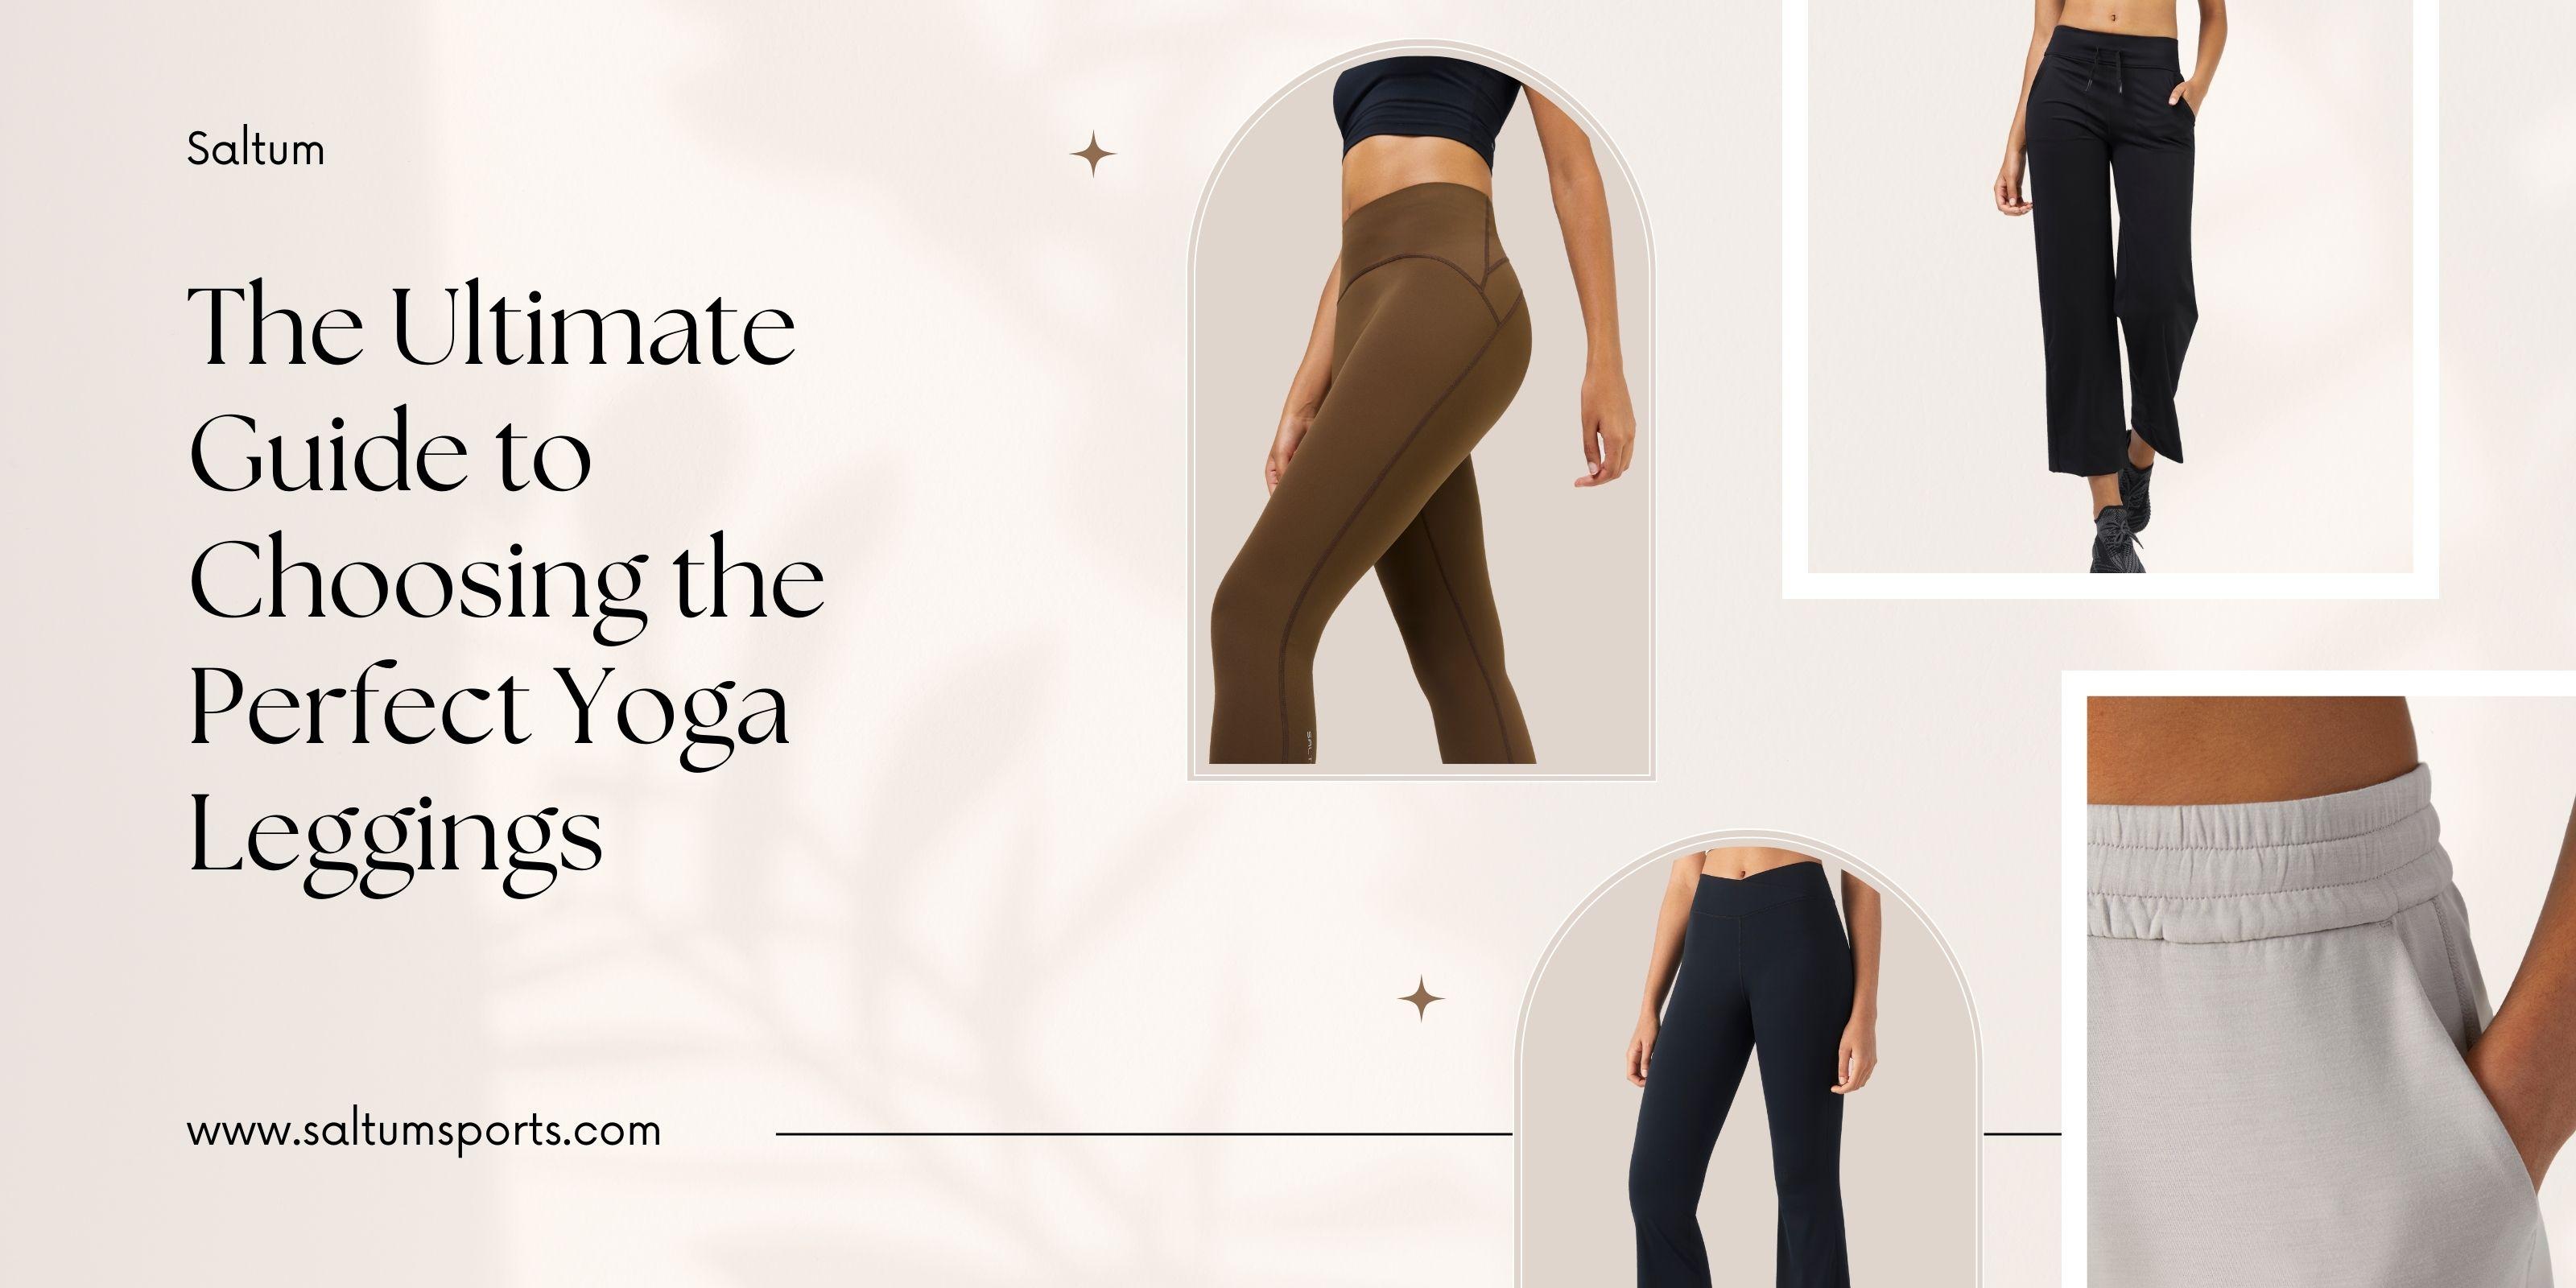 The Ultimate Guide to Choosing the Perfect Yoga Leggings